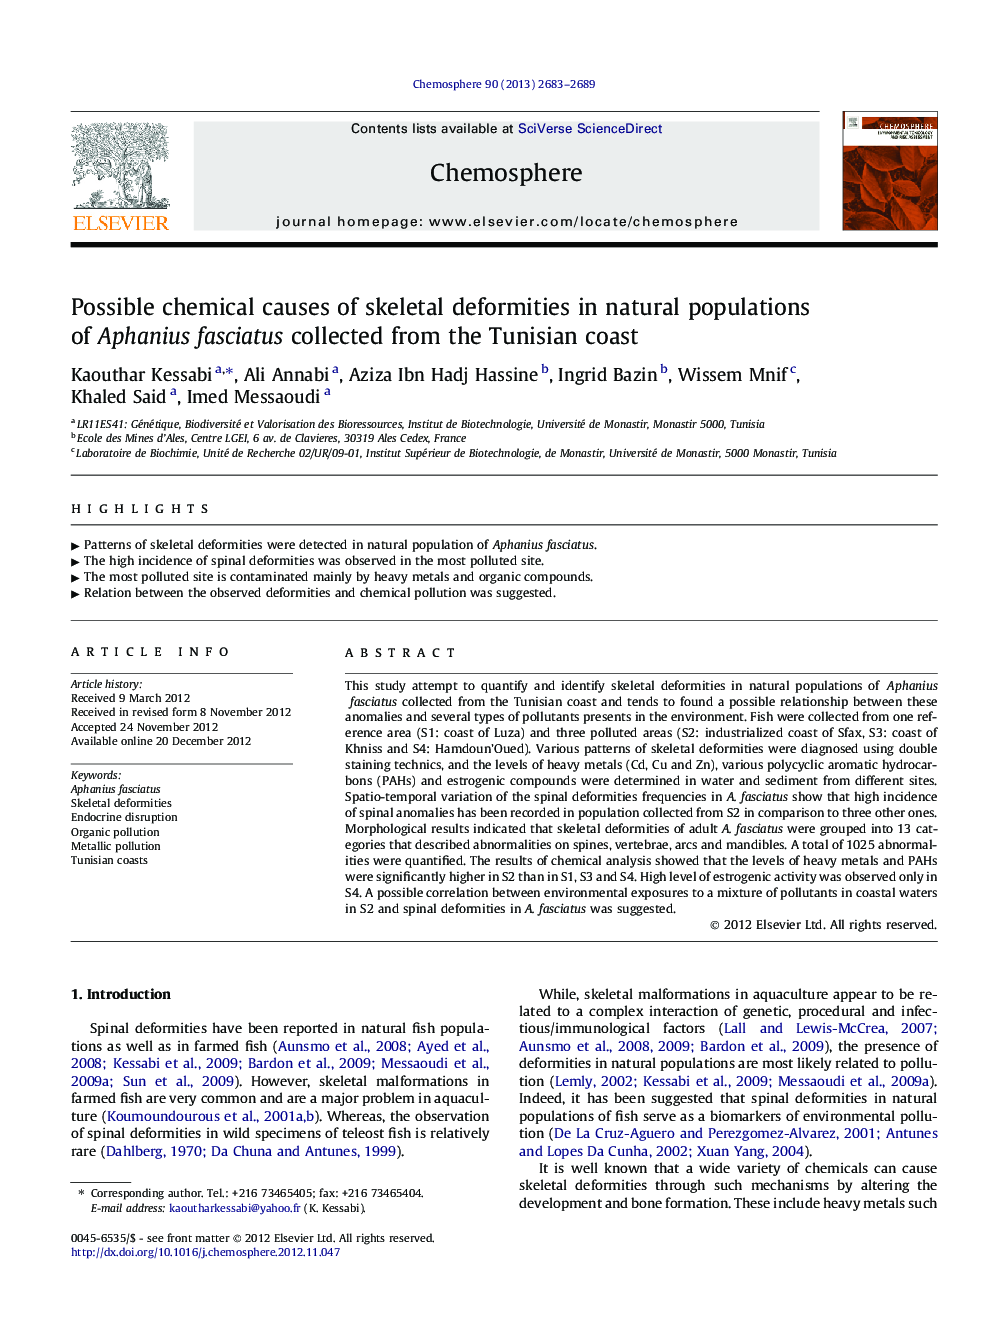 Possible chemical causes of skeletal deformities in natural populations of Aphanius fasciatus collected from the Tunisian coast